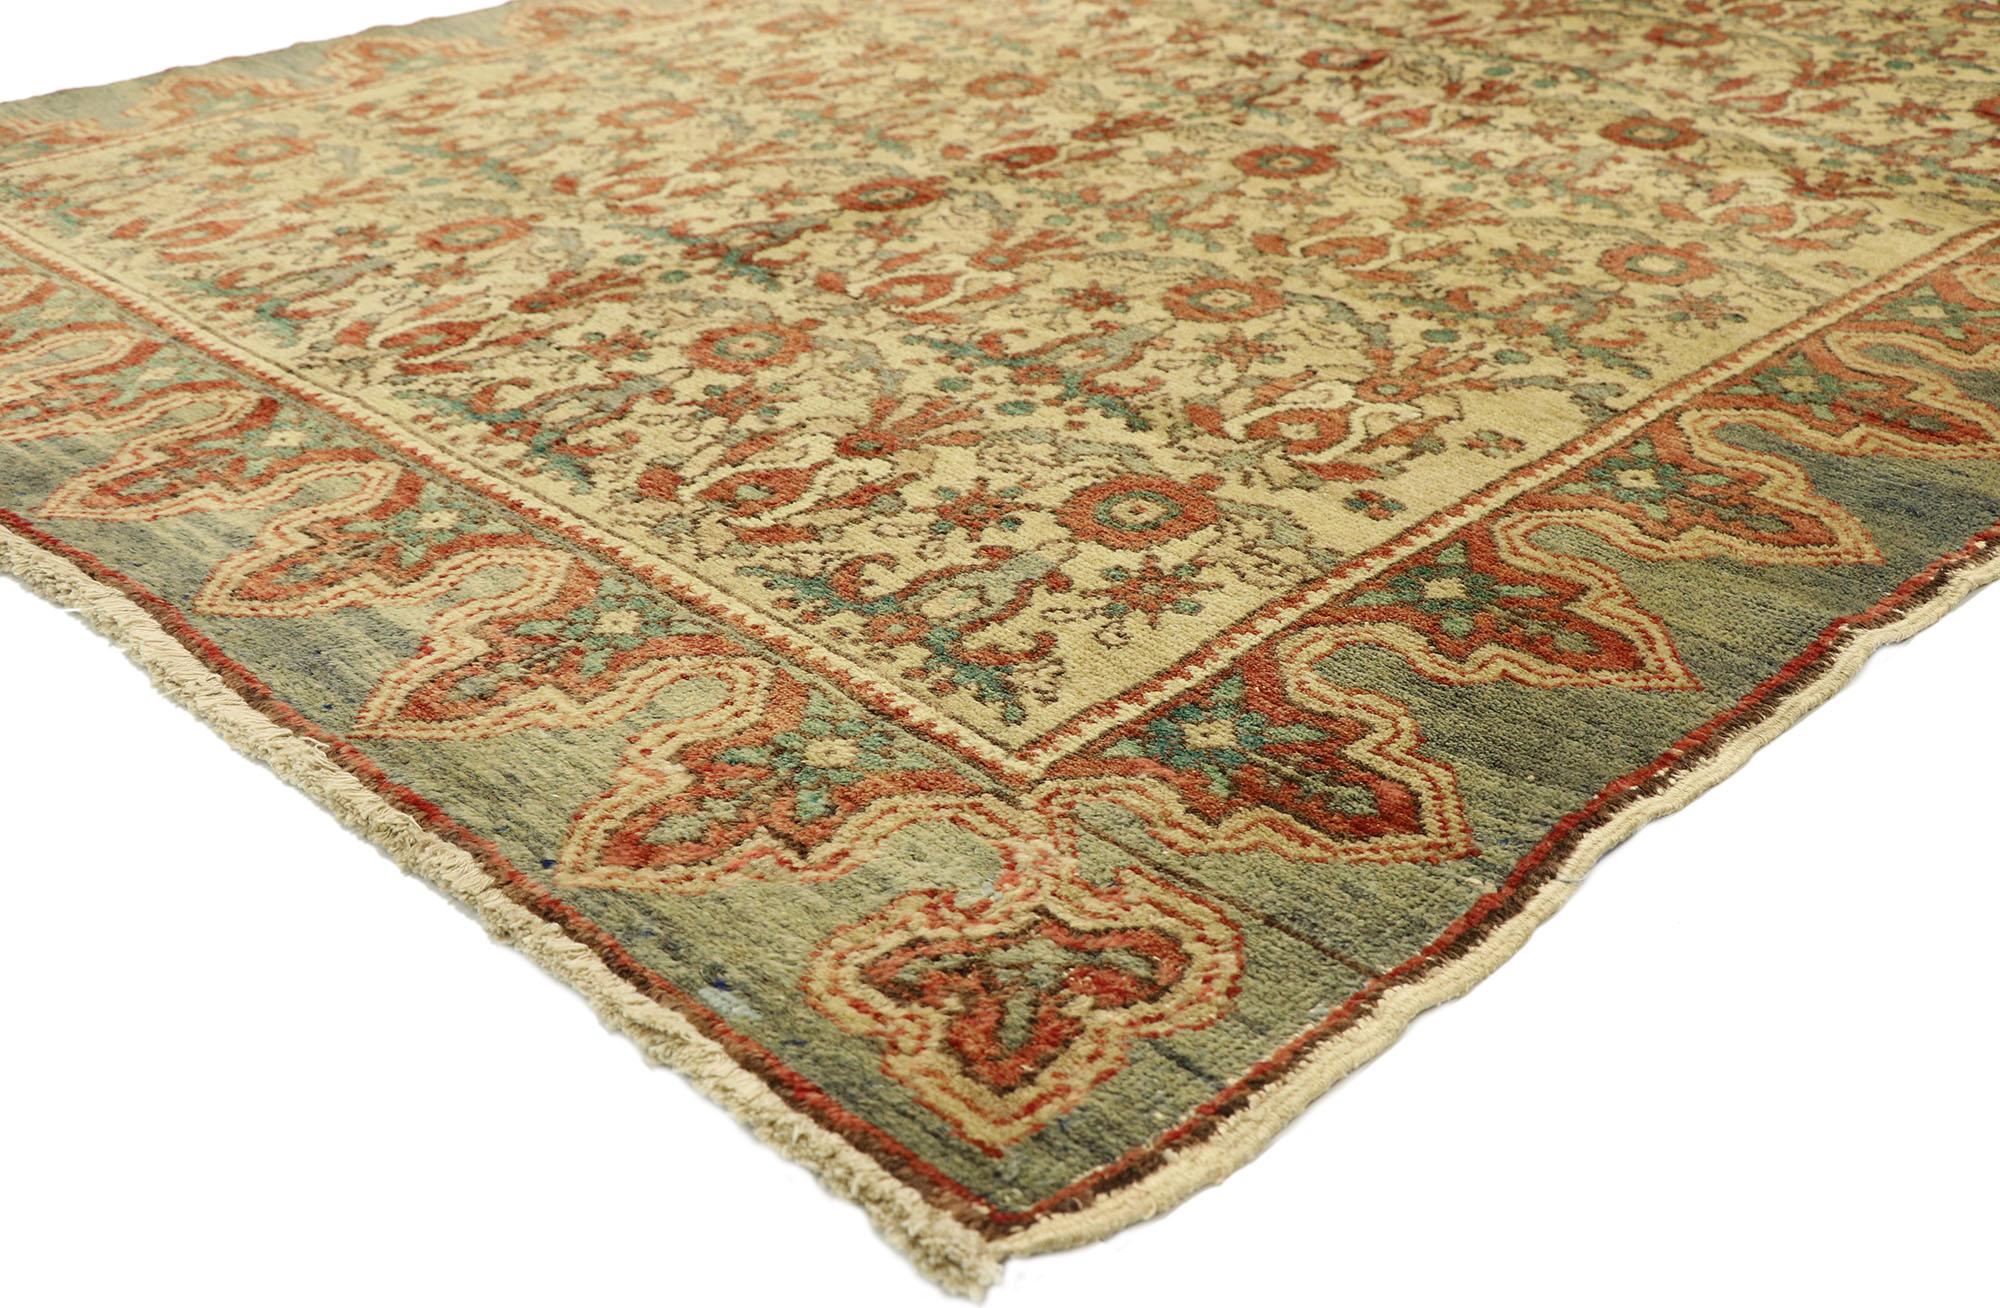 50168 Vintage Turkish Oushak Rug with Arts & Crafts Cottage Style 05'00 x 07'07. With its timeless design and symmetrical composition, this hand knotted wool vintage Turkish Oushak rug astounds with its beauty. The abrashed beige field is covered in